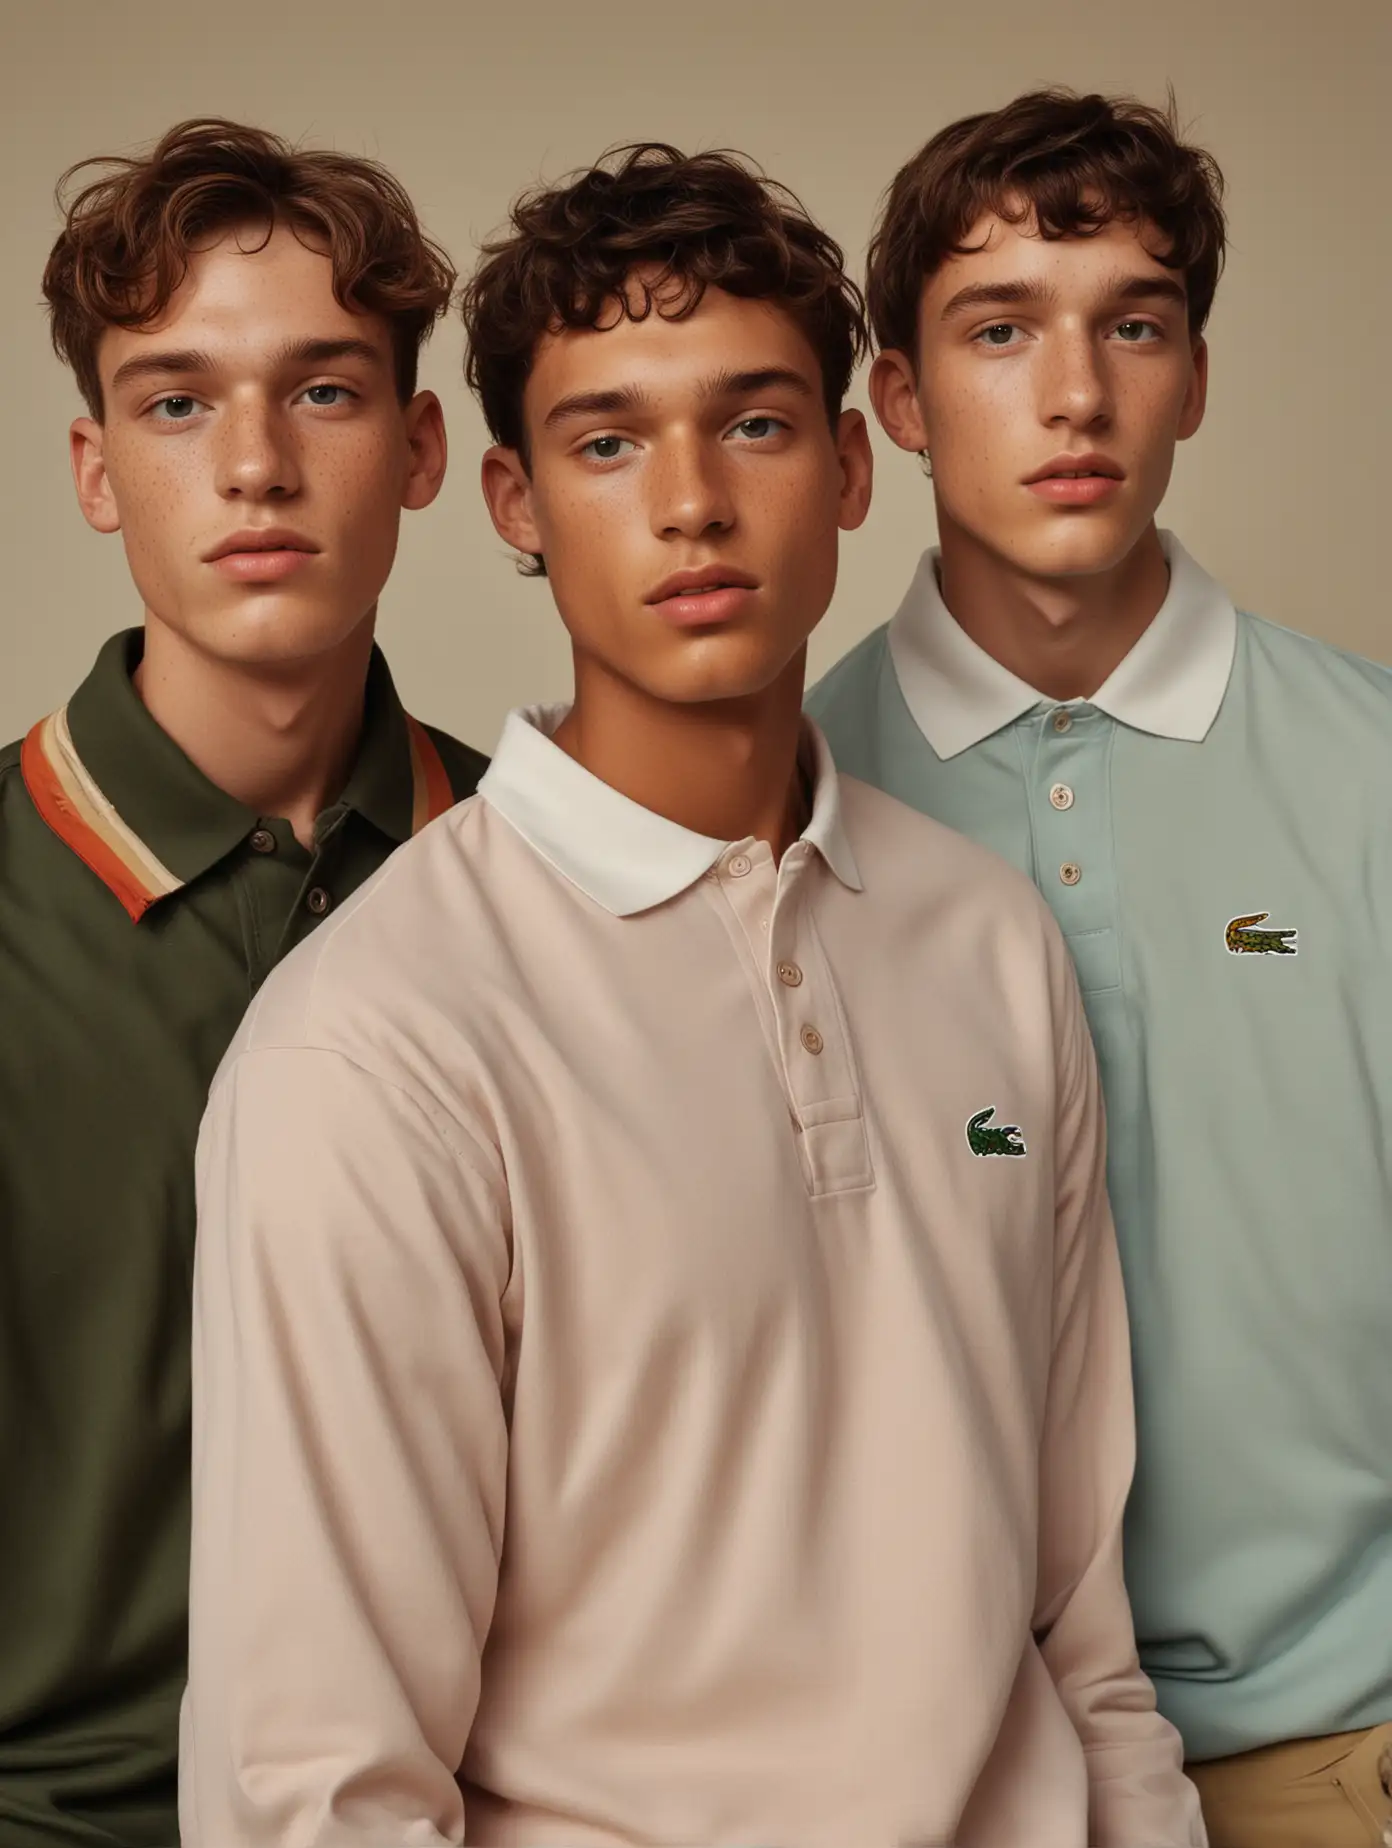 Colorful Renaissance Pose Freckled Male Models in Lacoste Outfits